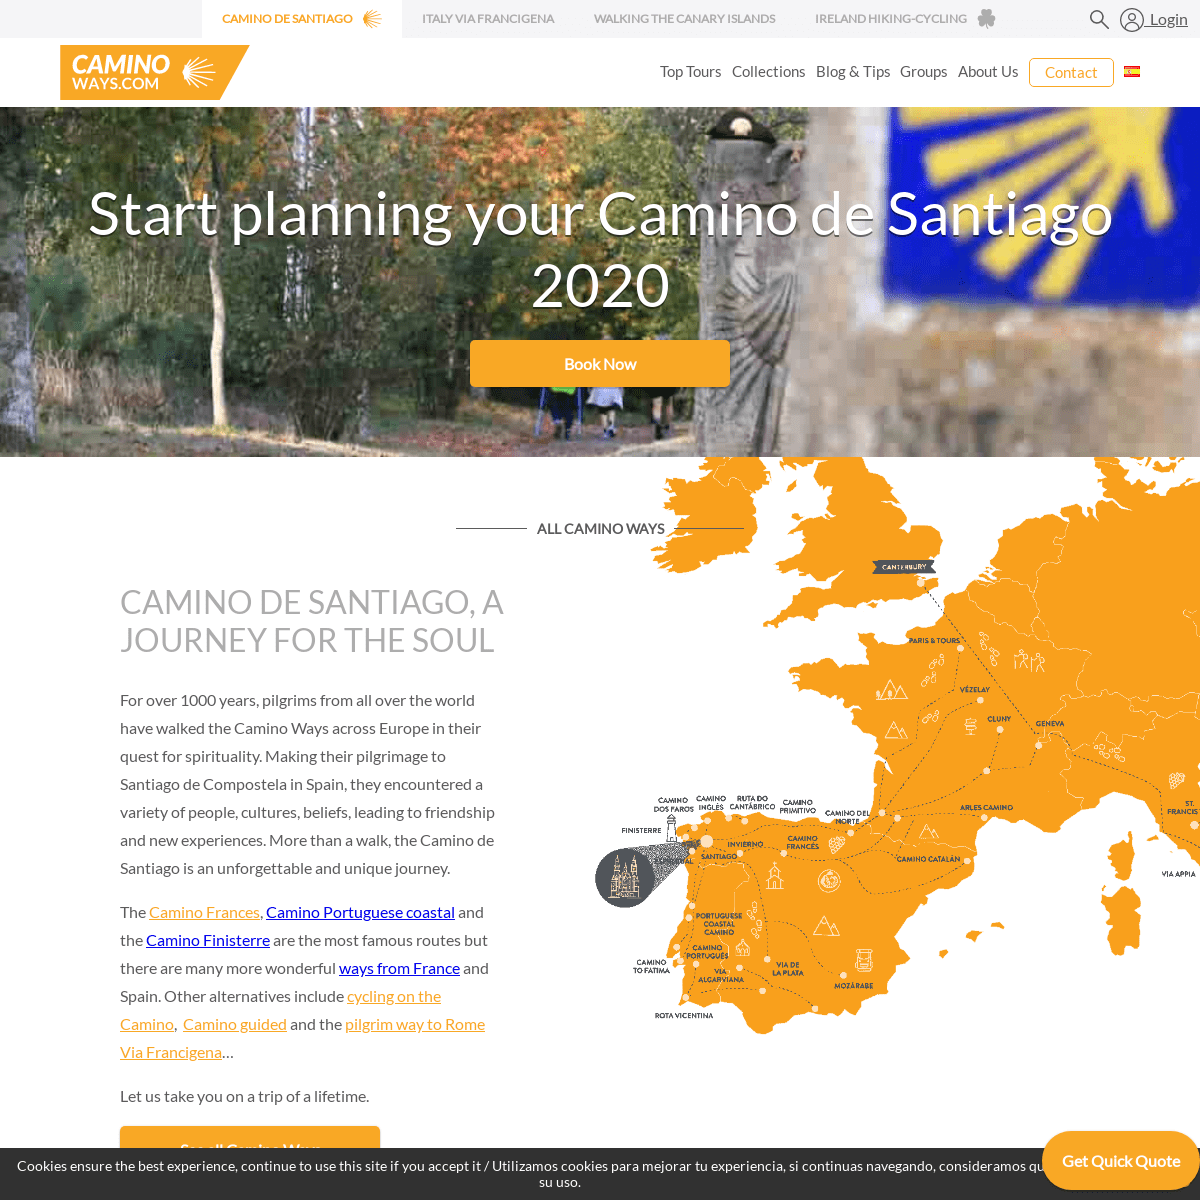 A complete backup of caminoways.com